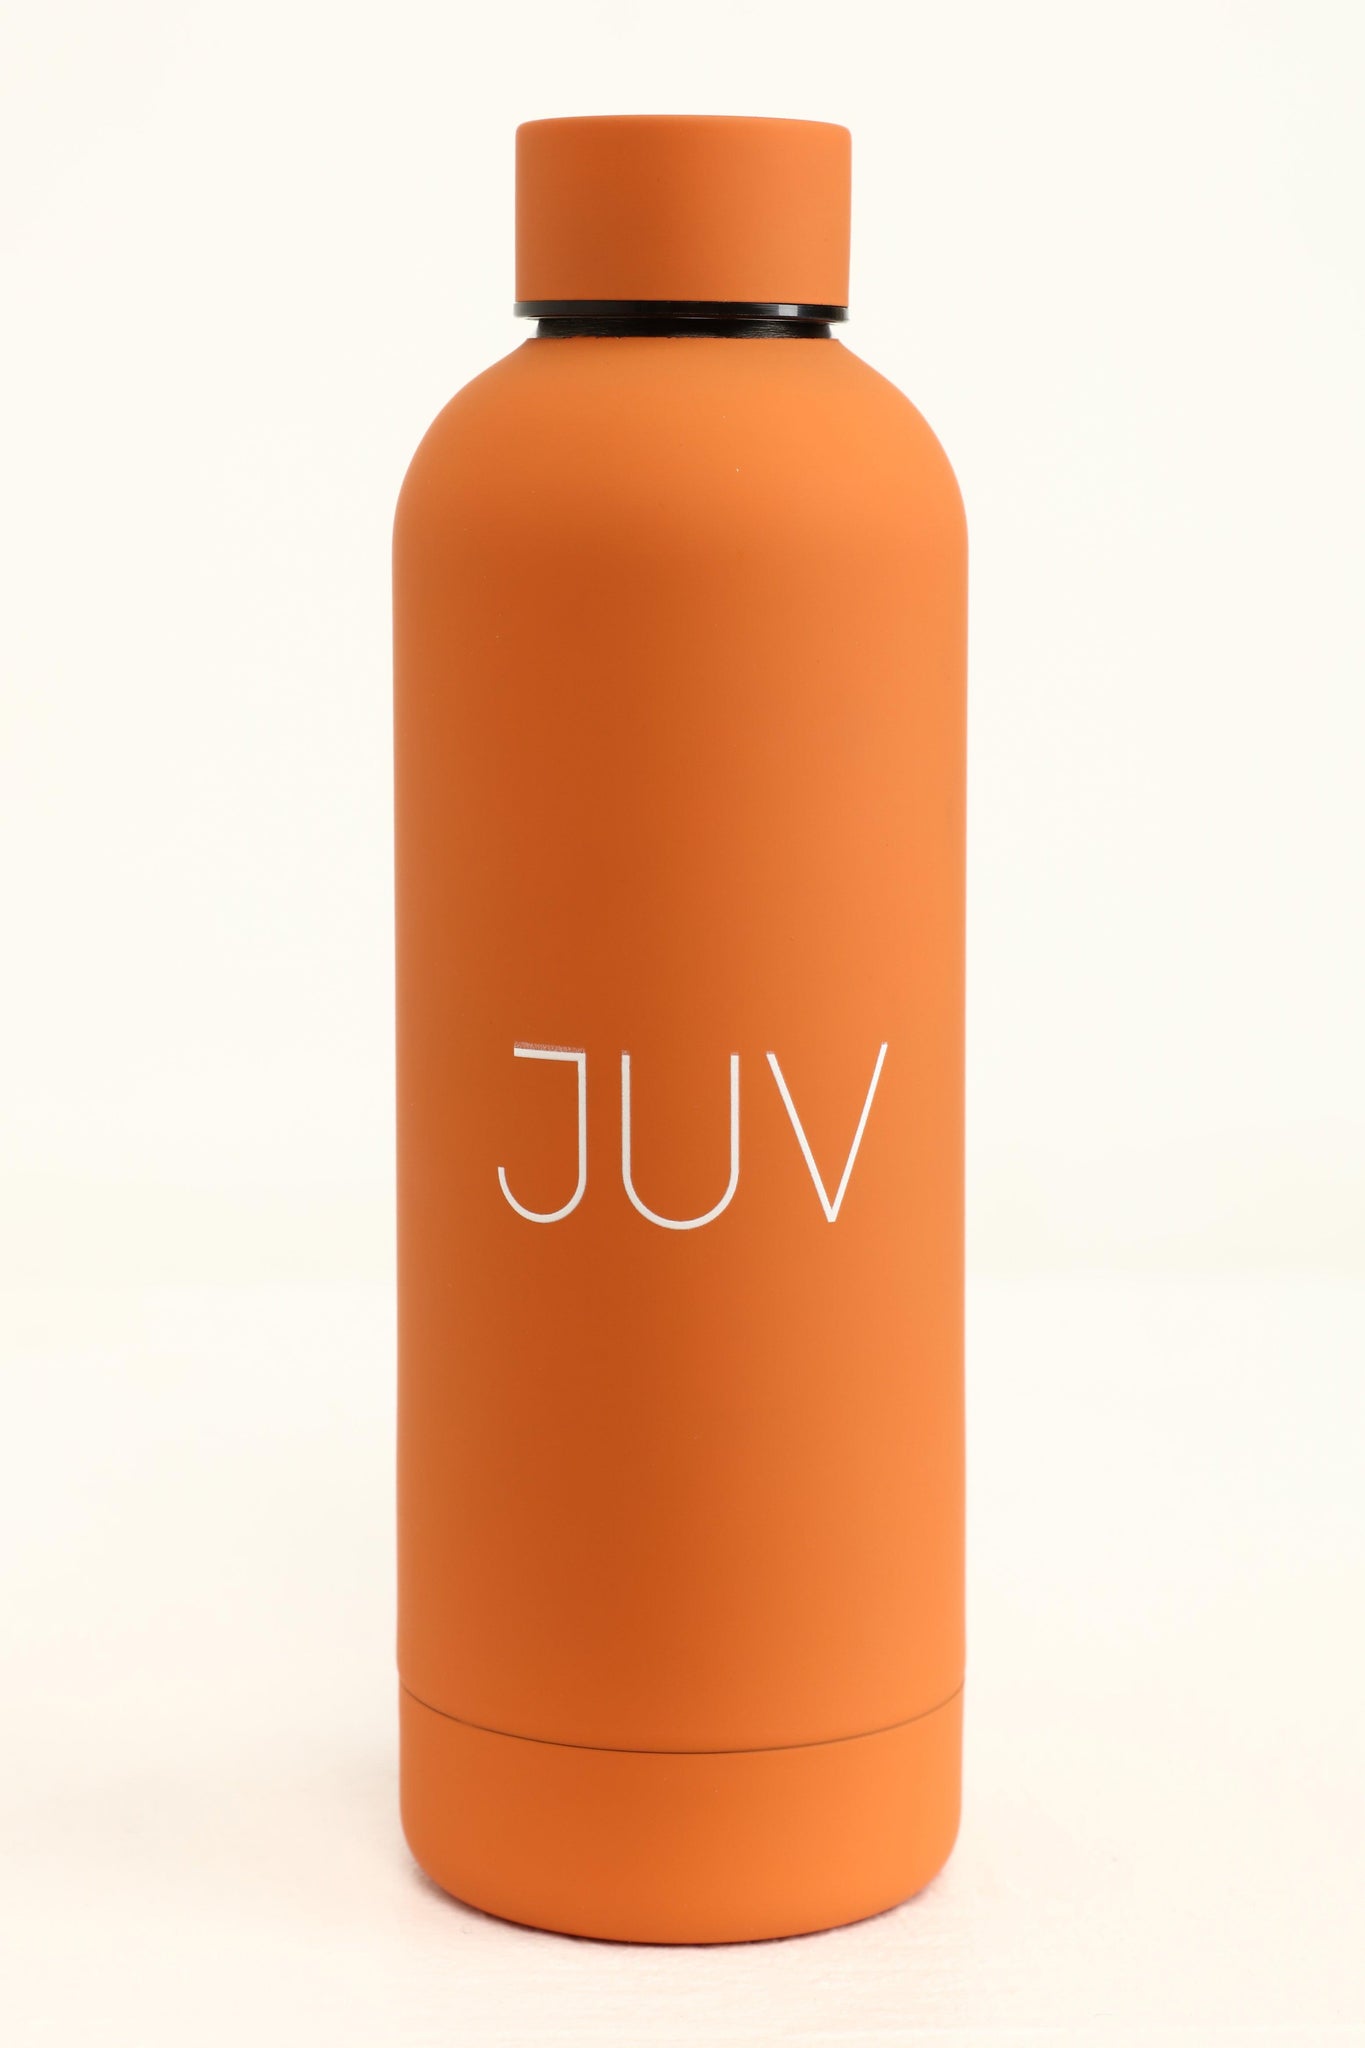 JUV mia thermal bottle in orange, front view.